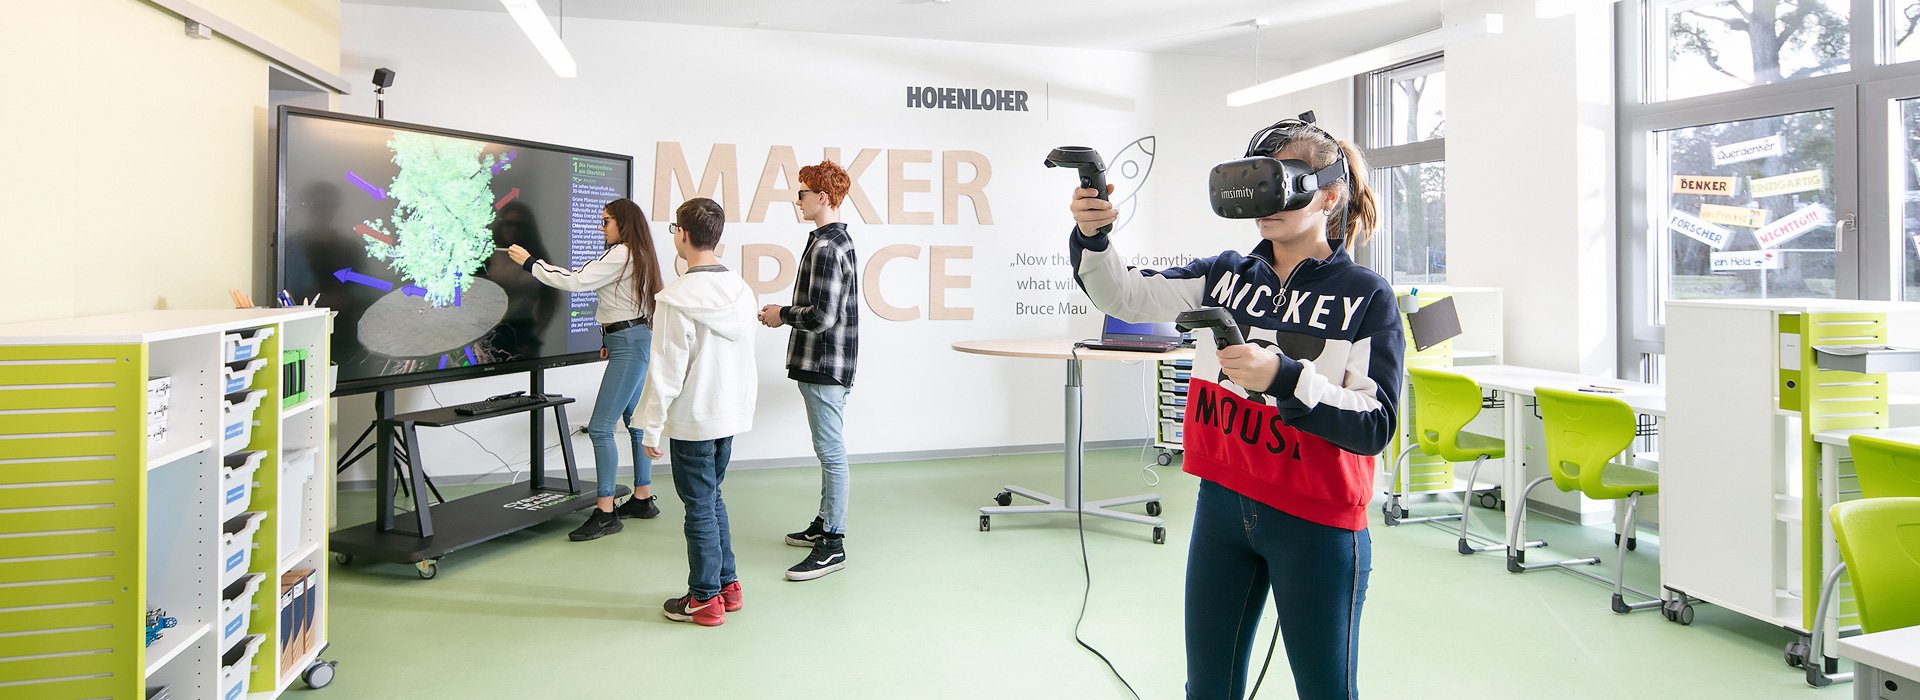 Image: Virtual reality at Makerspace